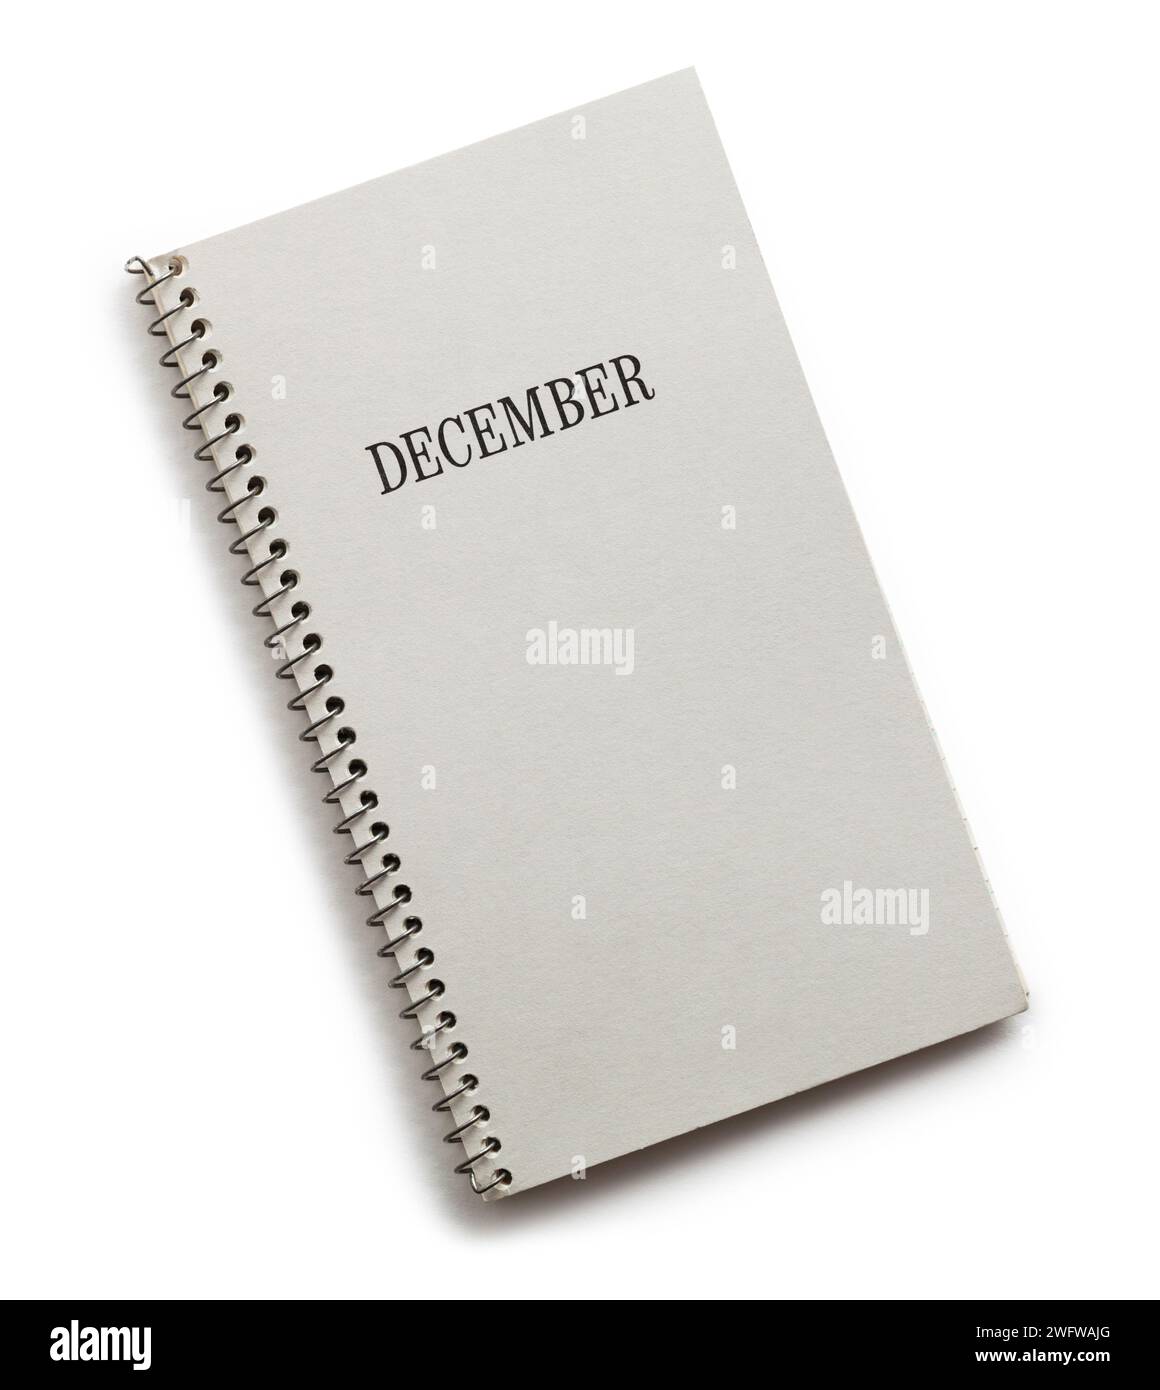 Dezember Daily Planner Cut Out on White. Stockfoto